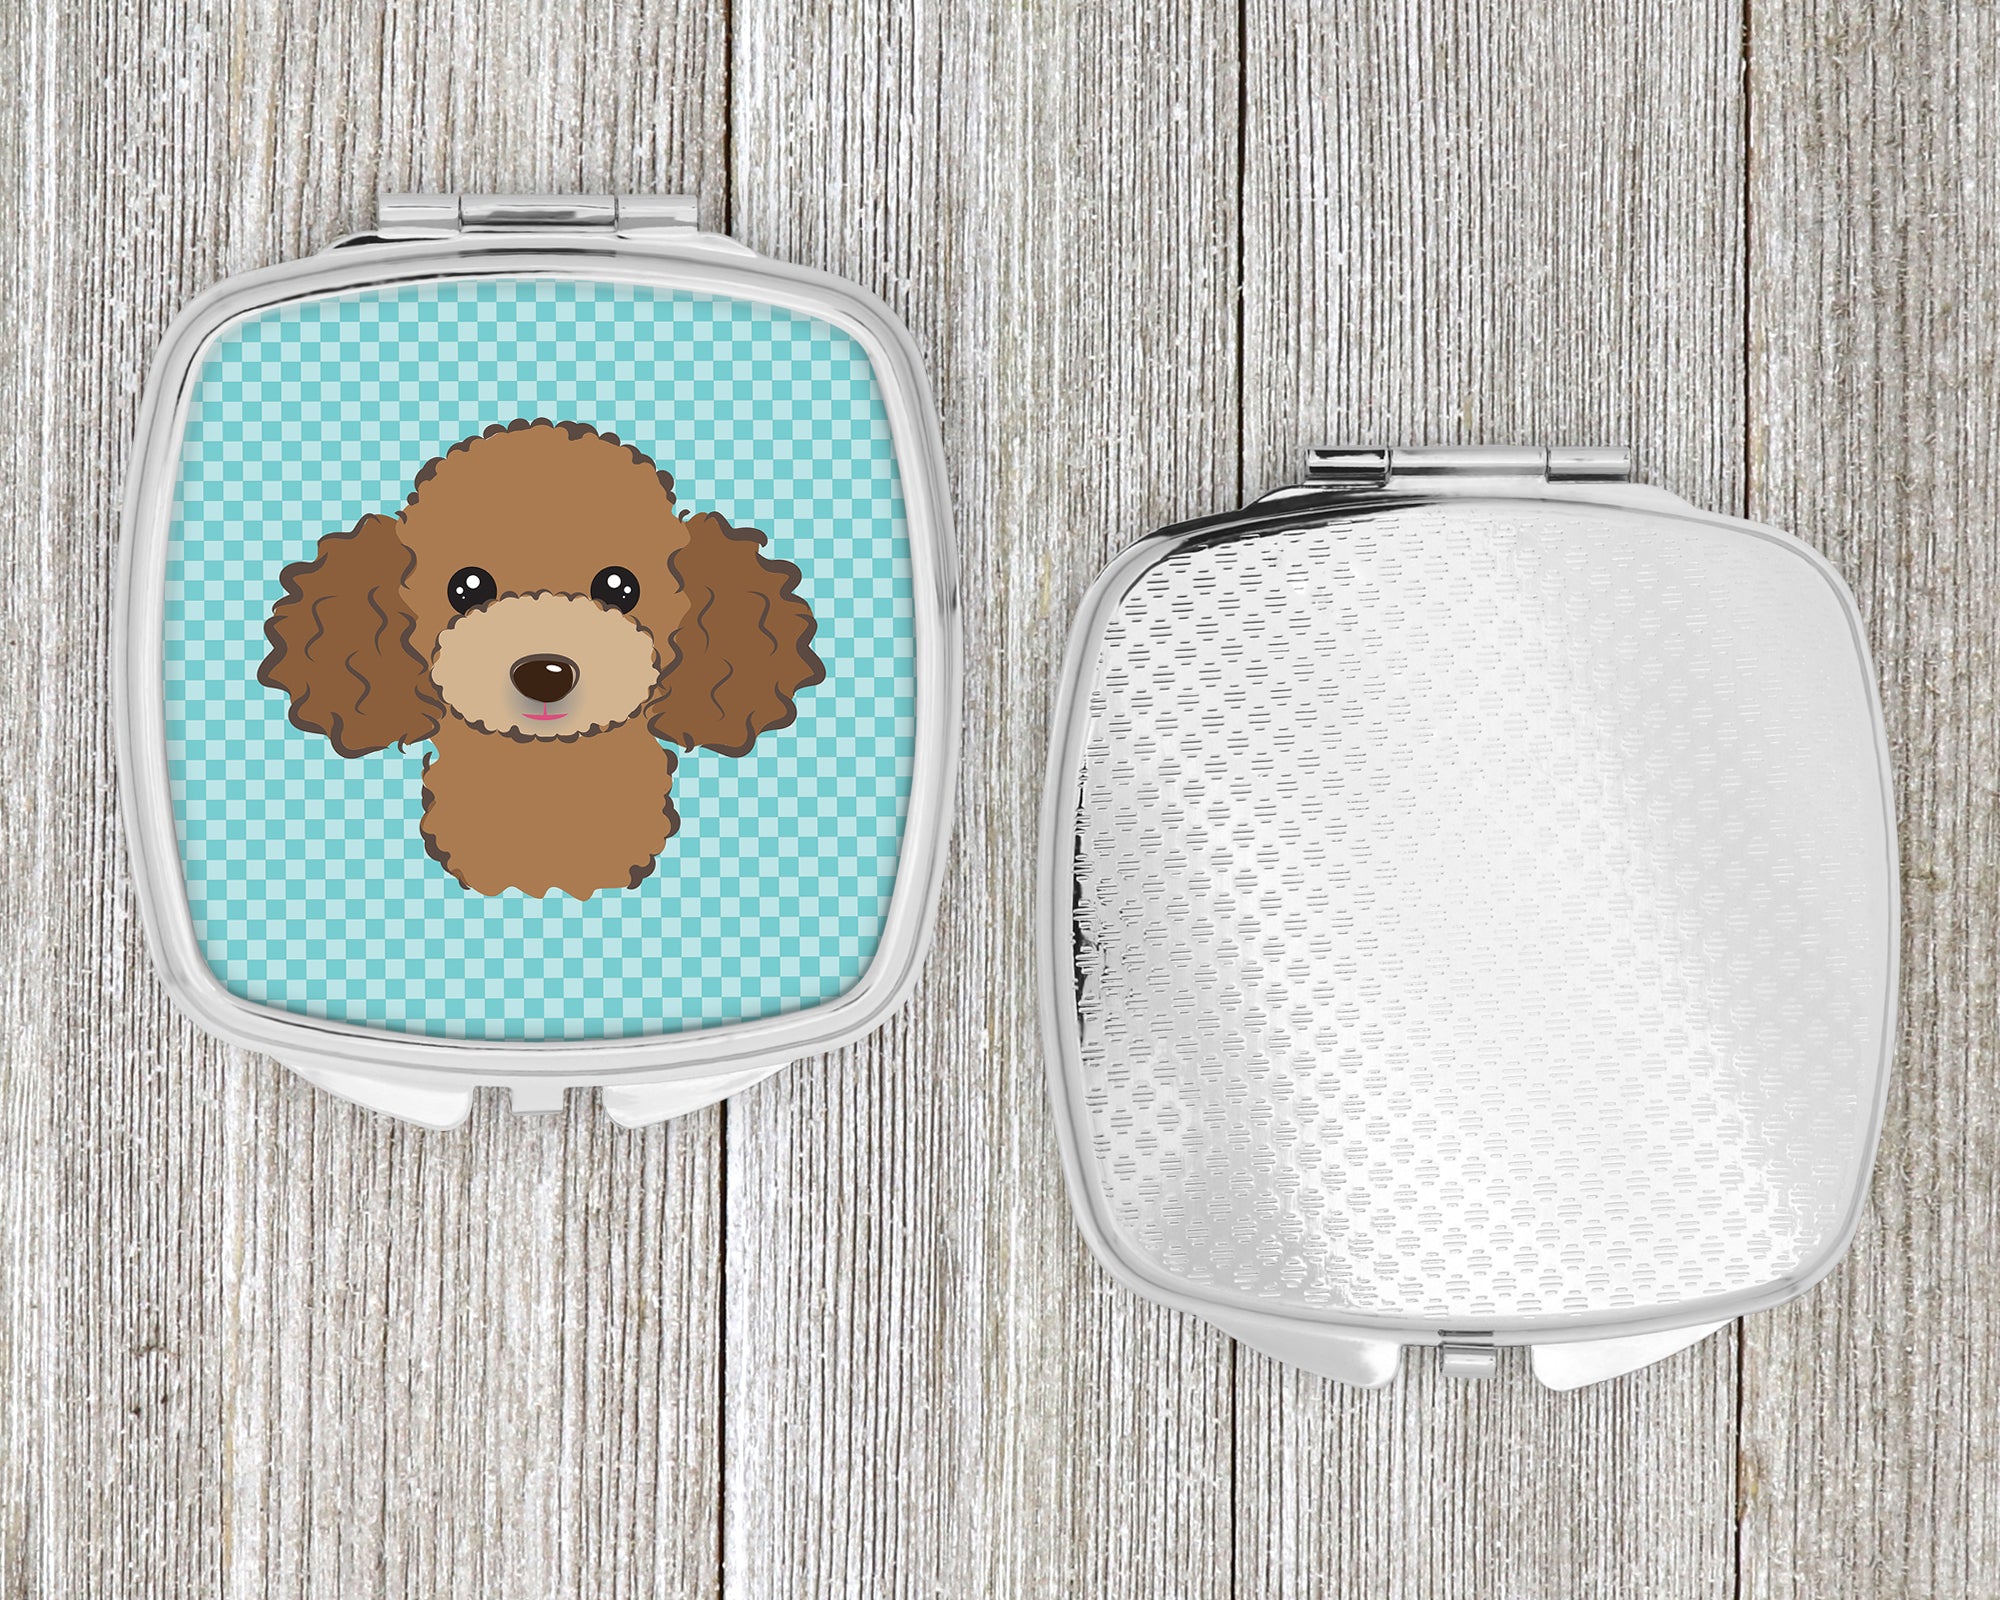 Checkerboard Blue Chocolate Brown Poodle Compact Mirror BB1194SCM